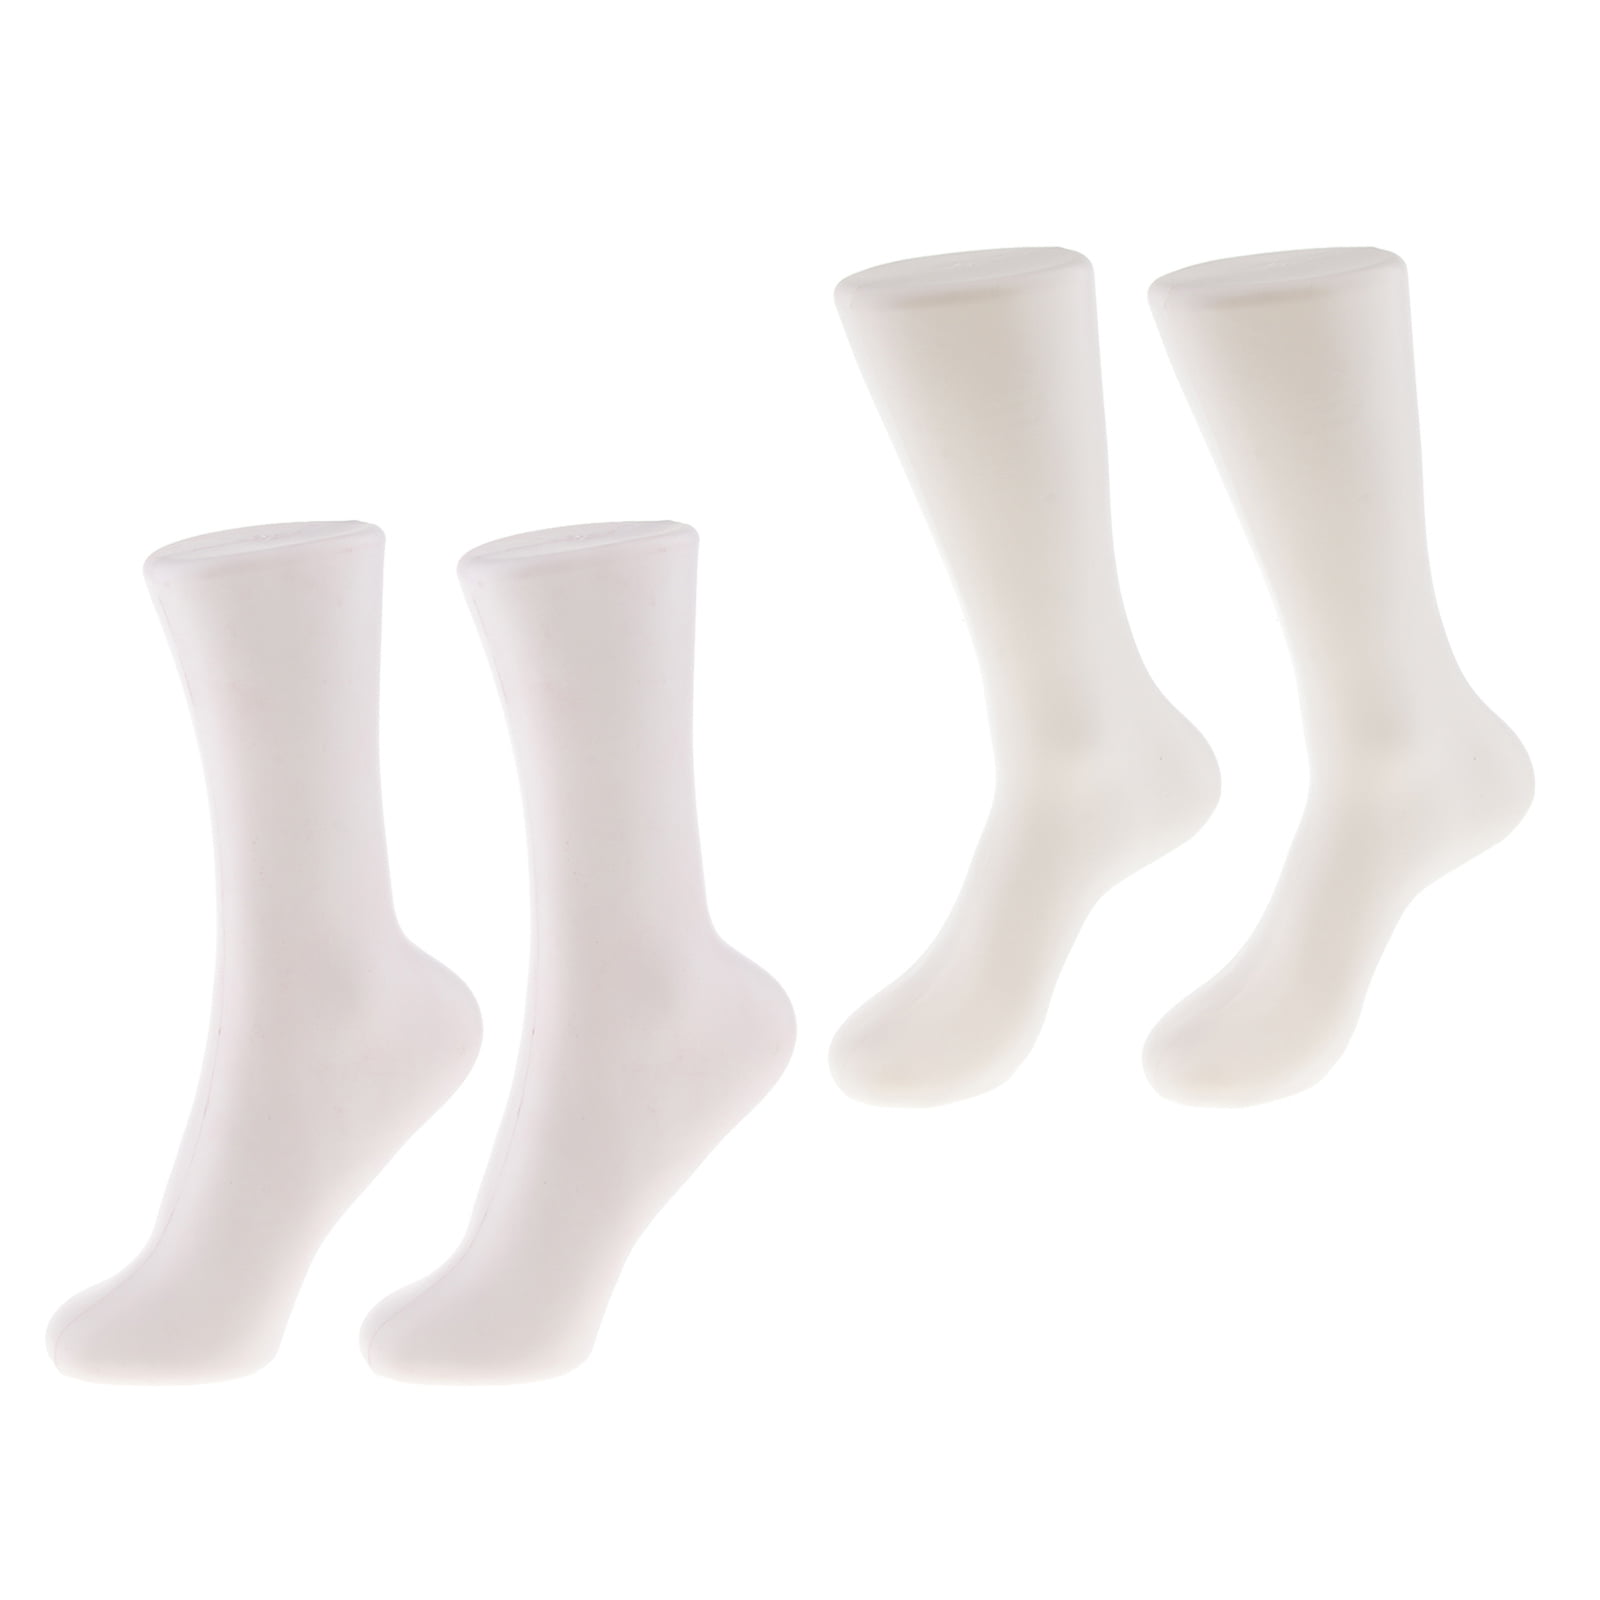 Female Feet Mannequin Sock Sox Display Model White Stable and Portable 